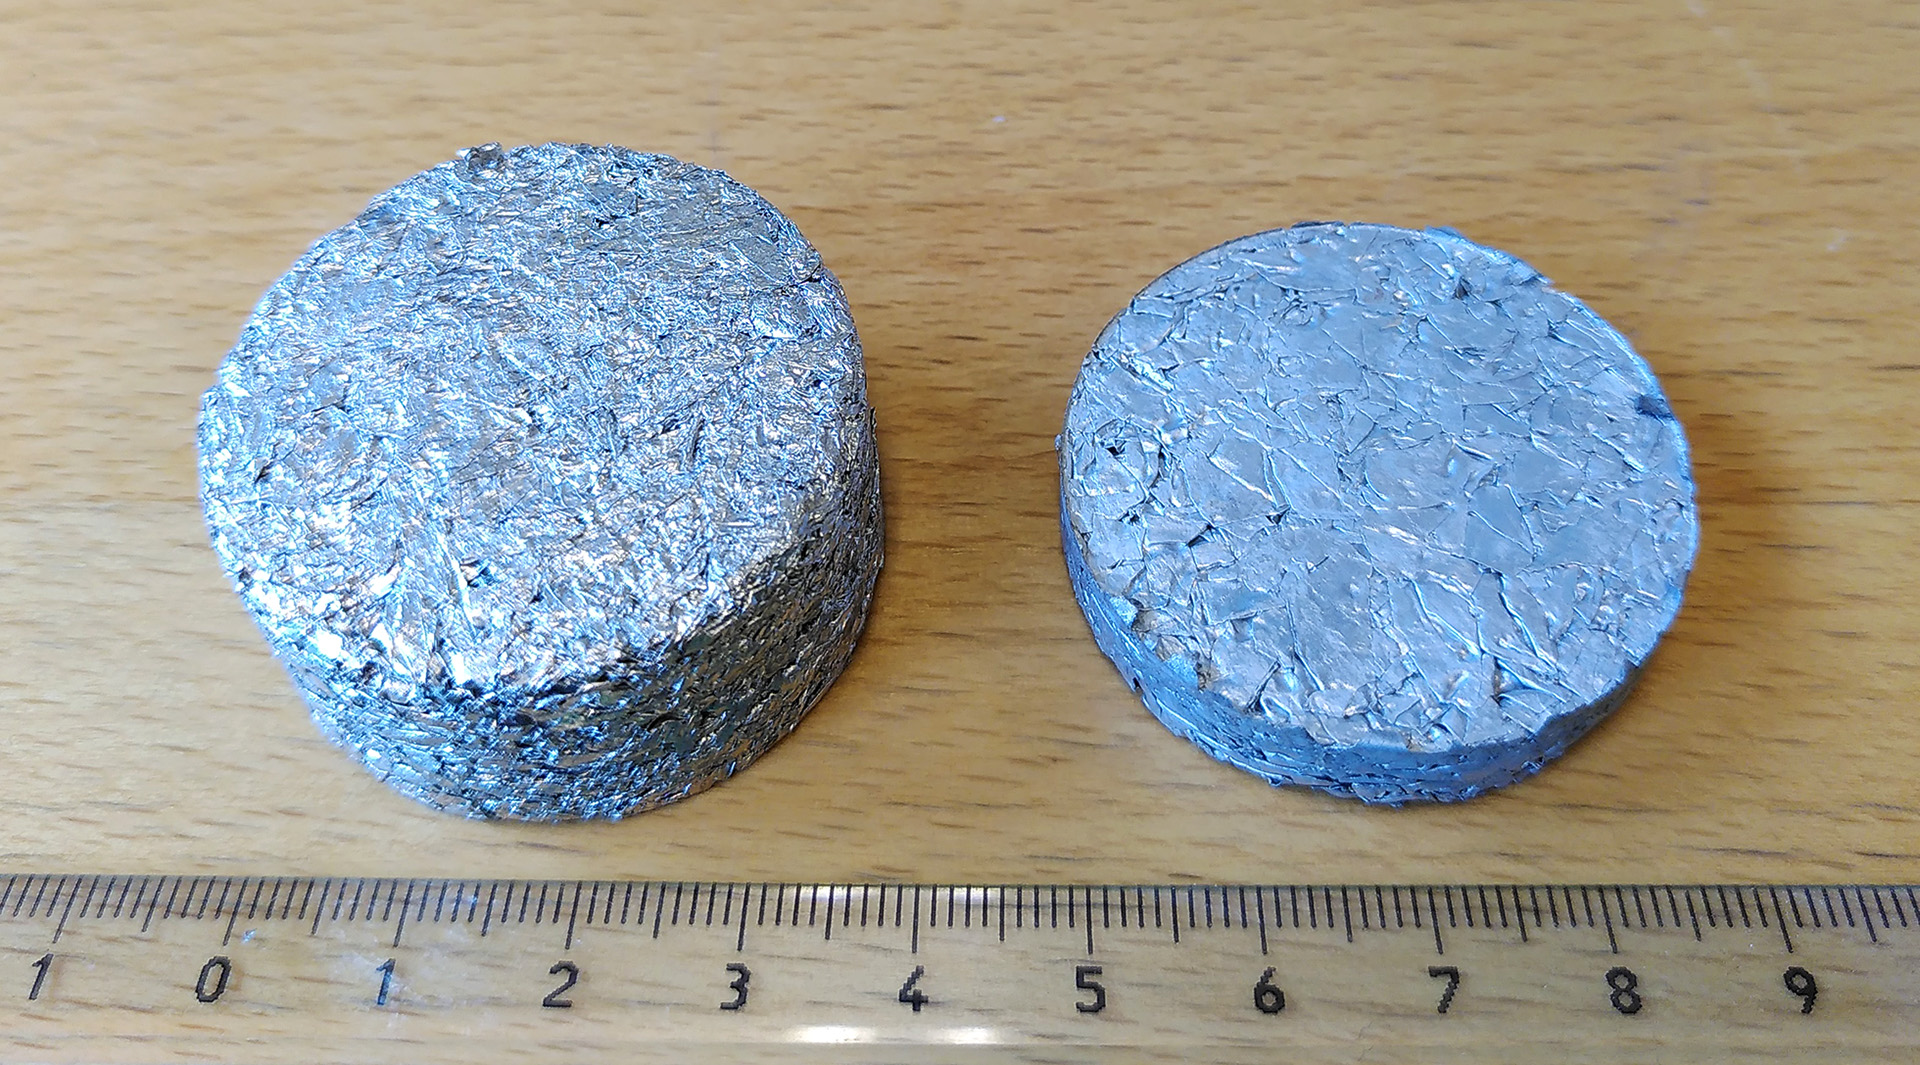 Aluminium foils compacted into 2 briquettes with a ruler next to them. Photo